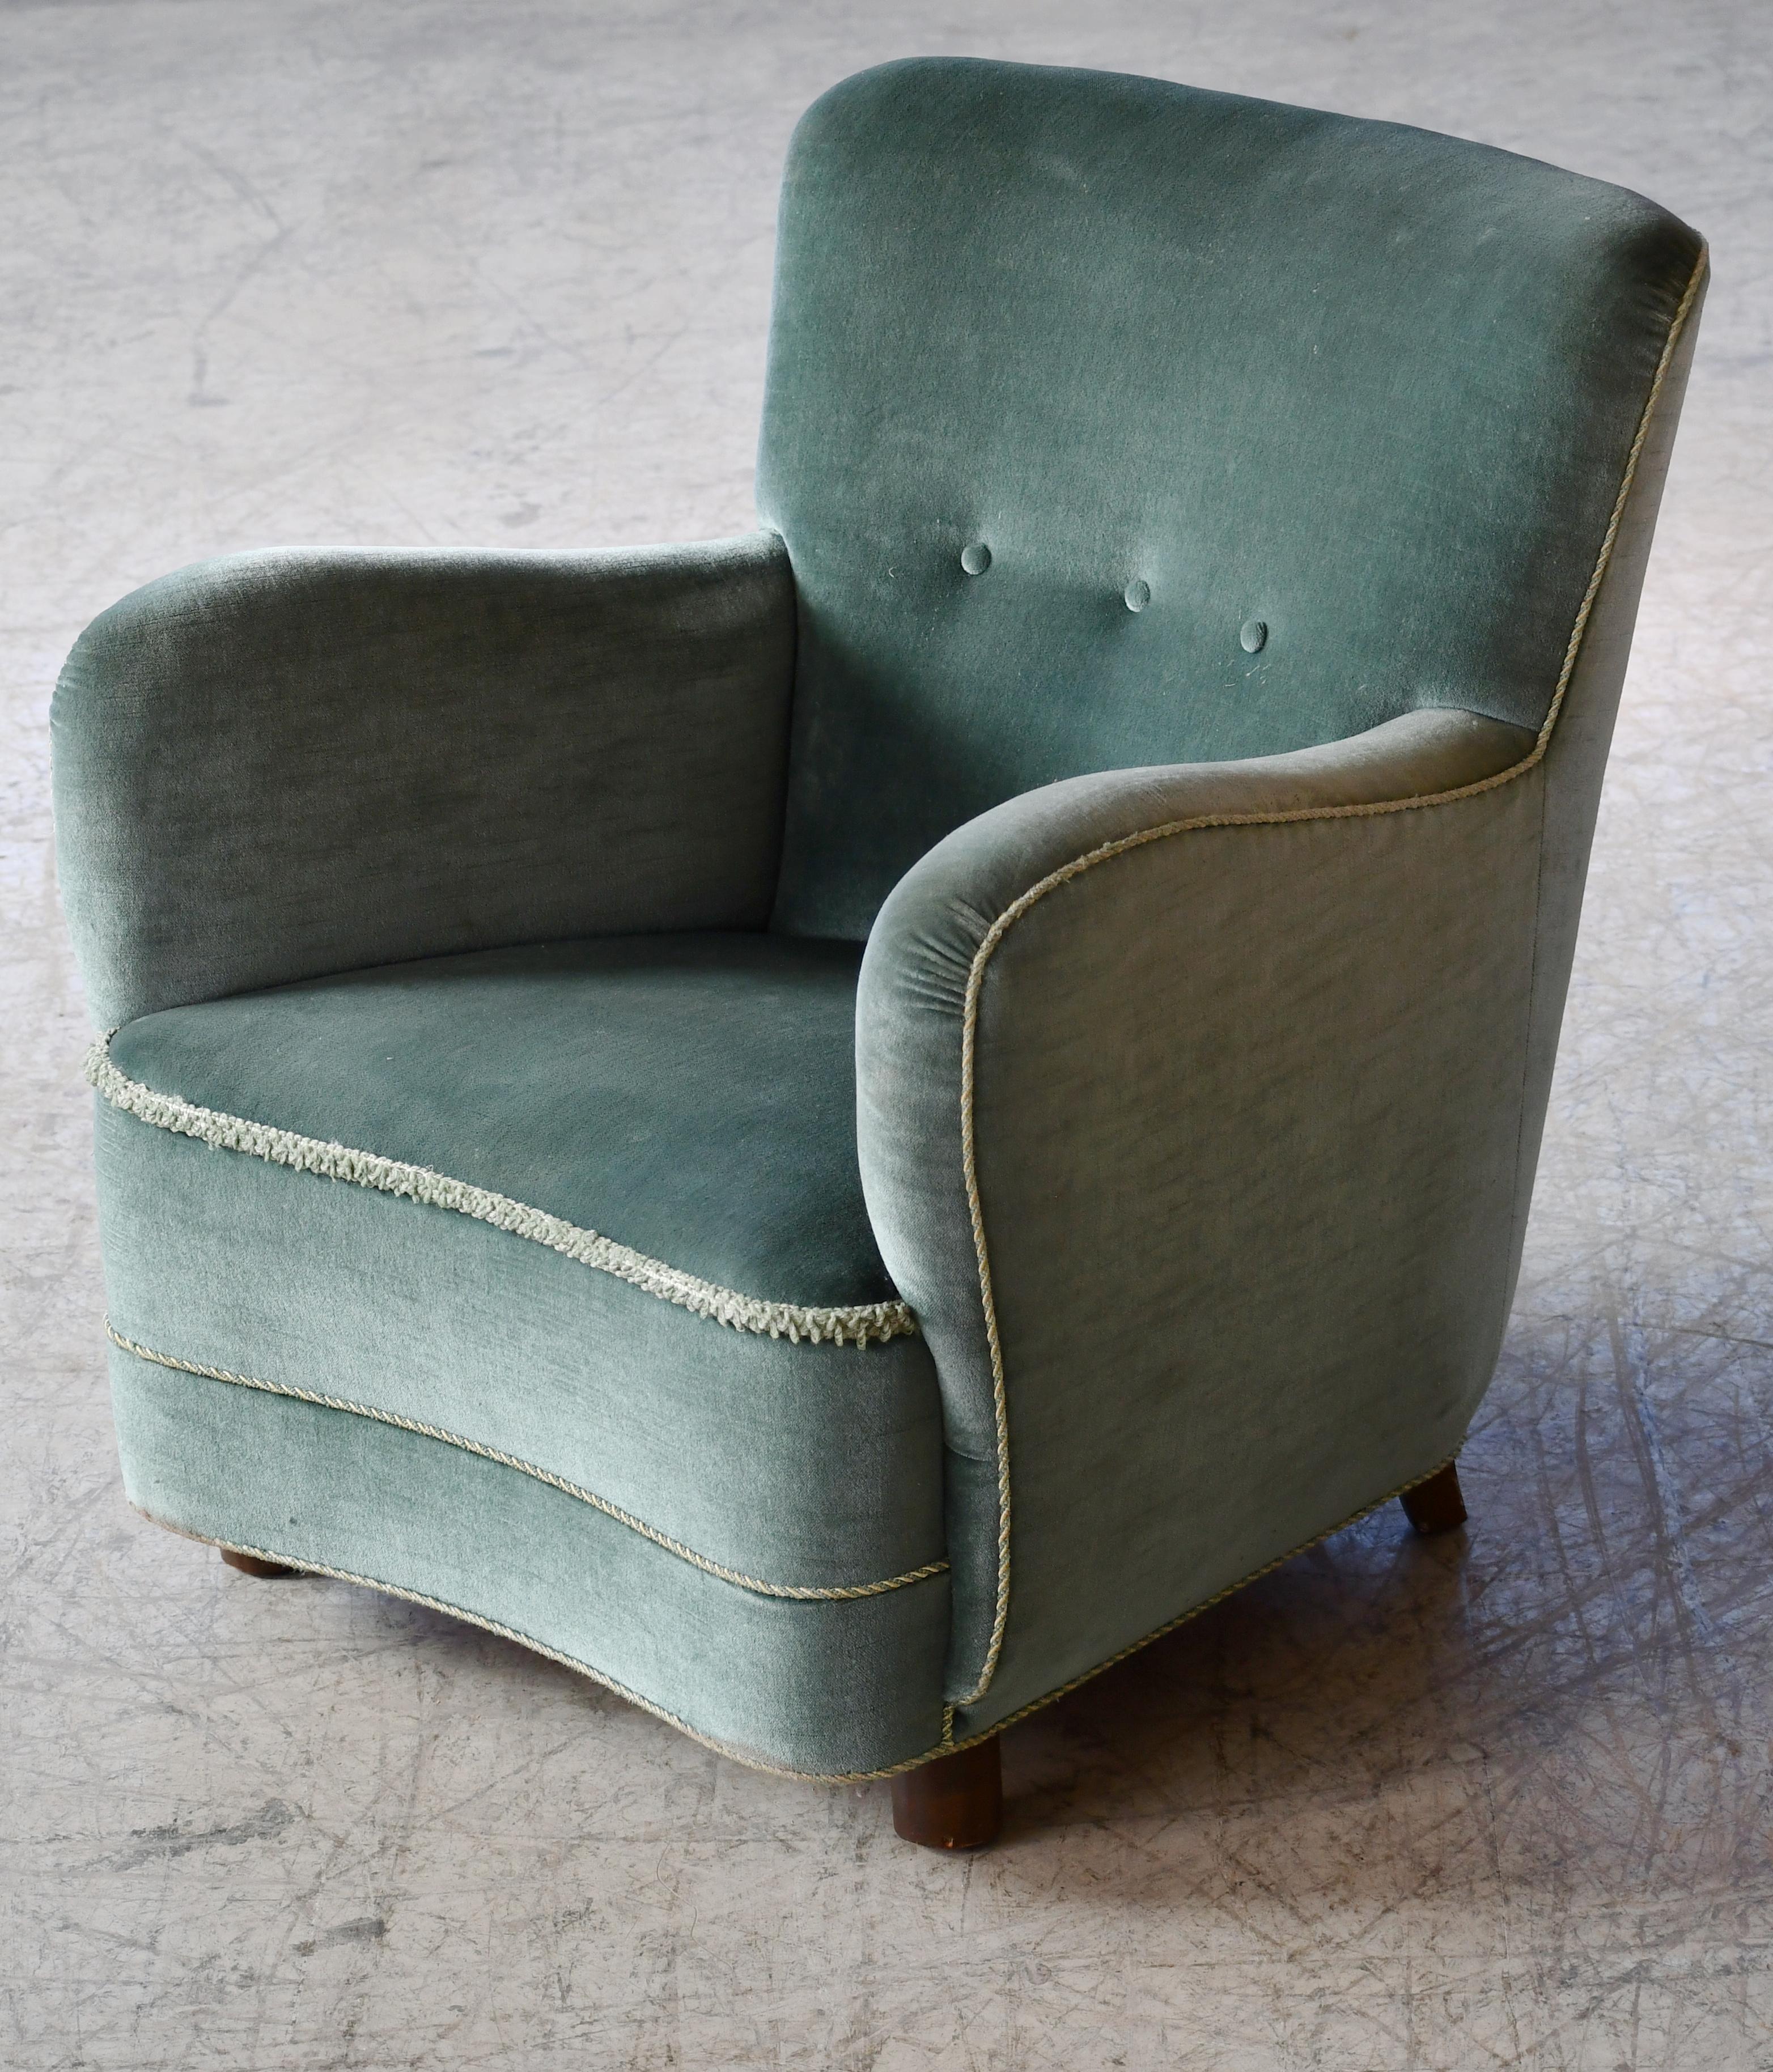 Danish Art Deco or Early Midcentury Lounge Chair in Green Mohair 1930-40s For Sale